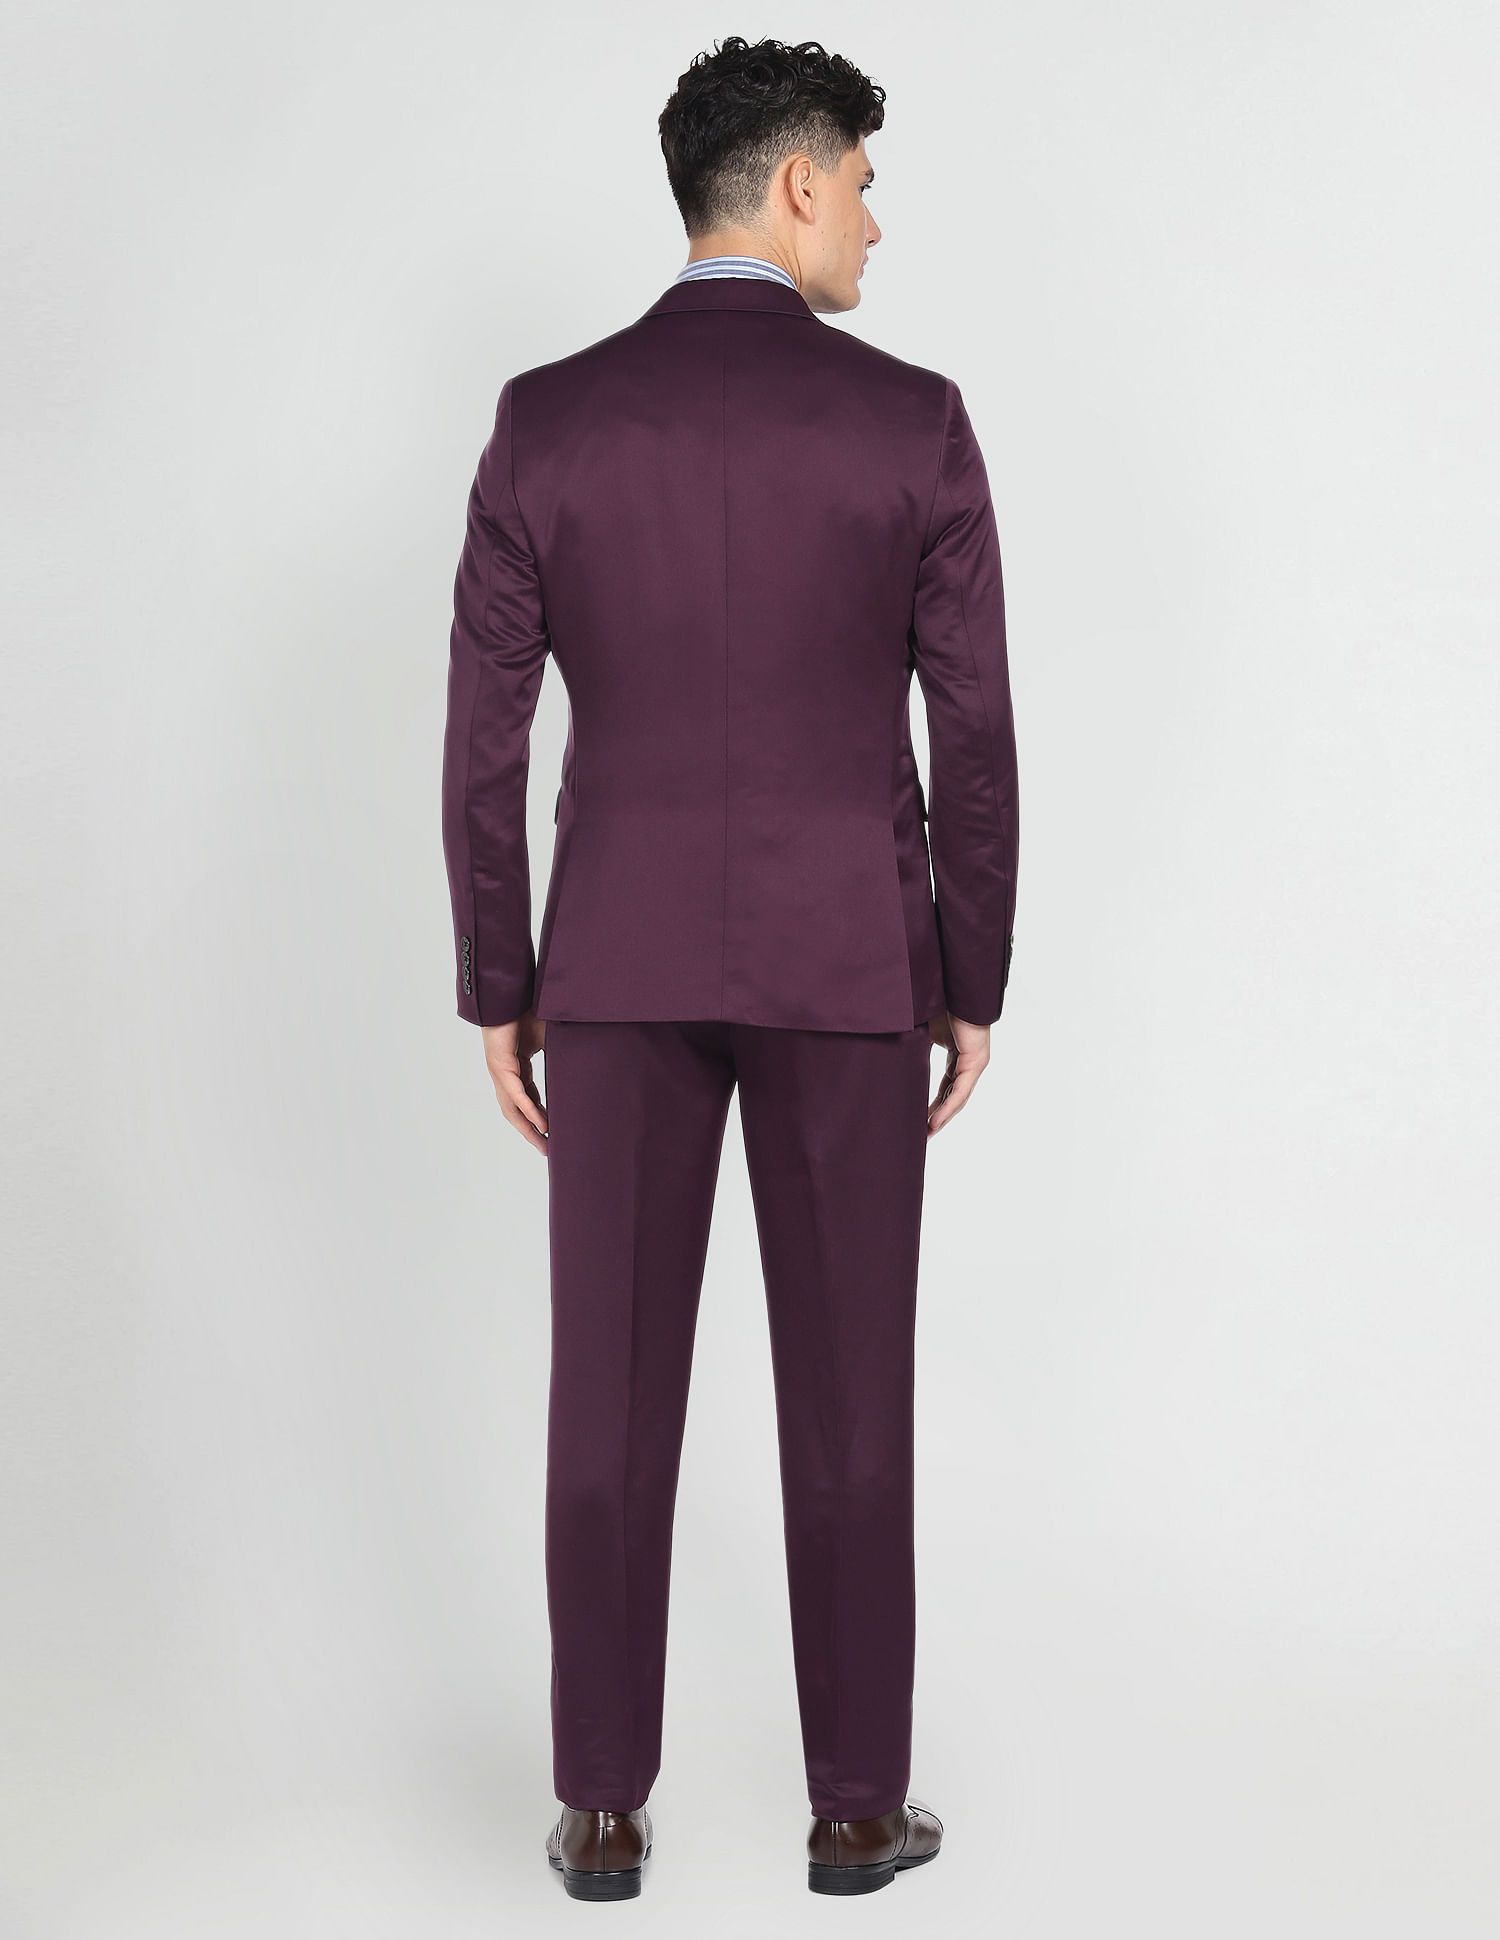 Fitted burgundy suit trousers in wool | The Kooples